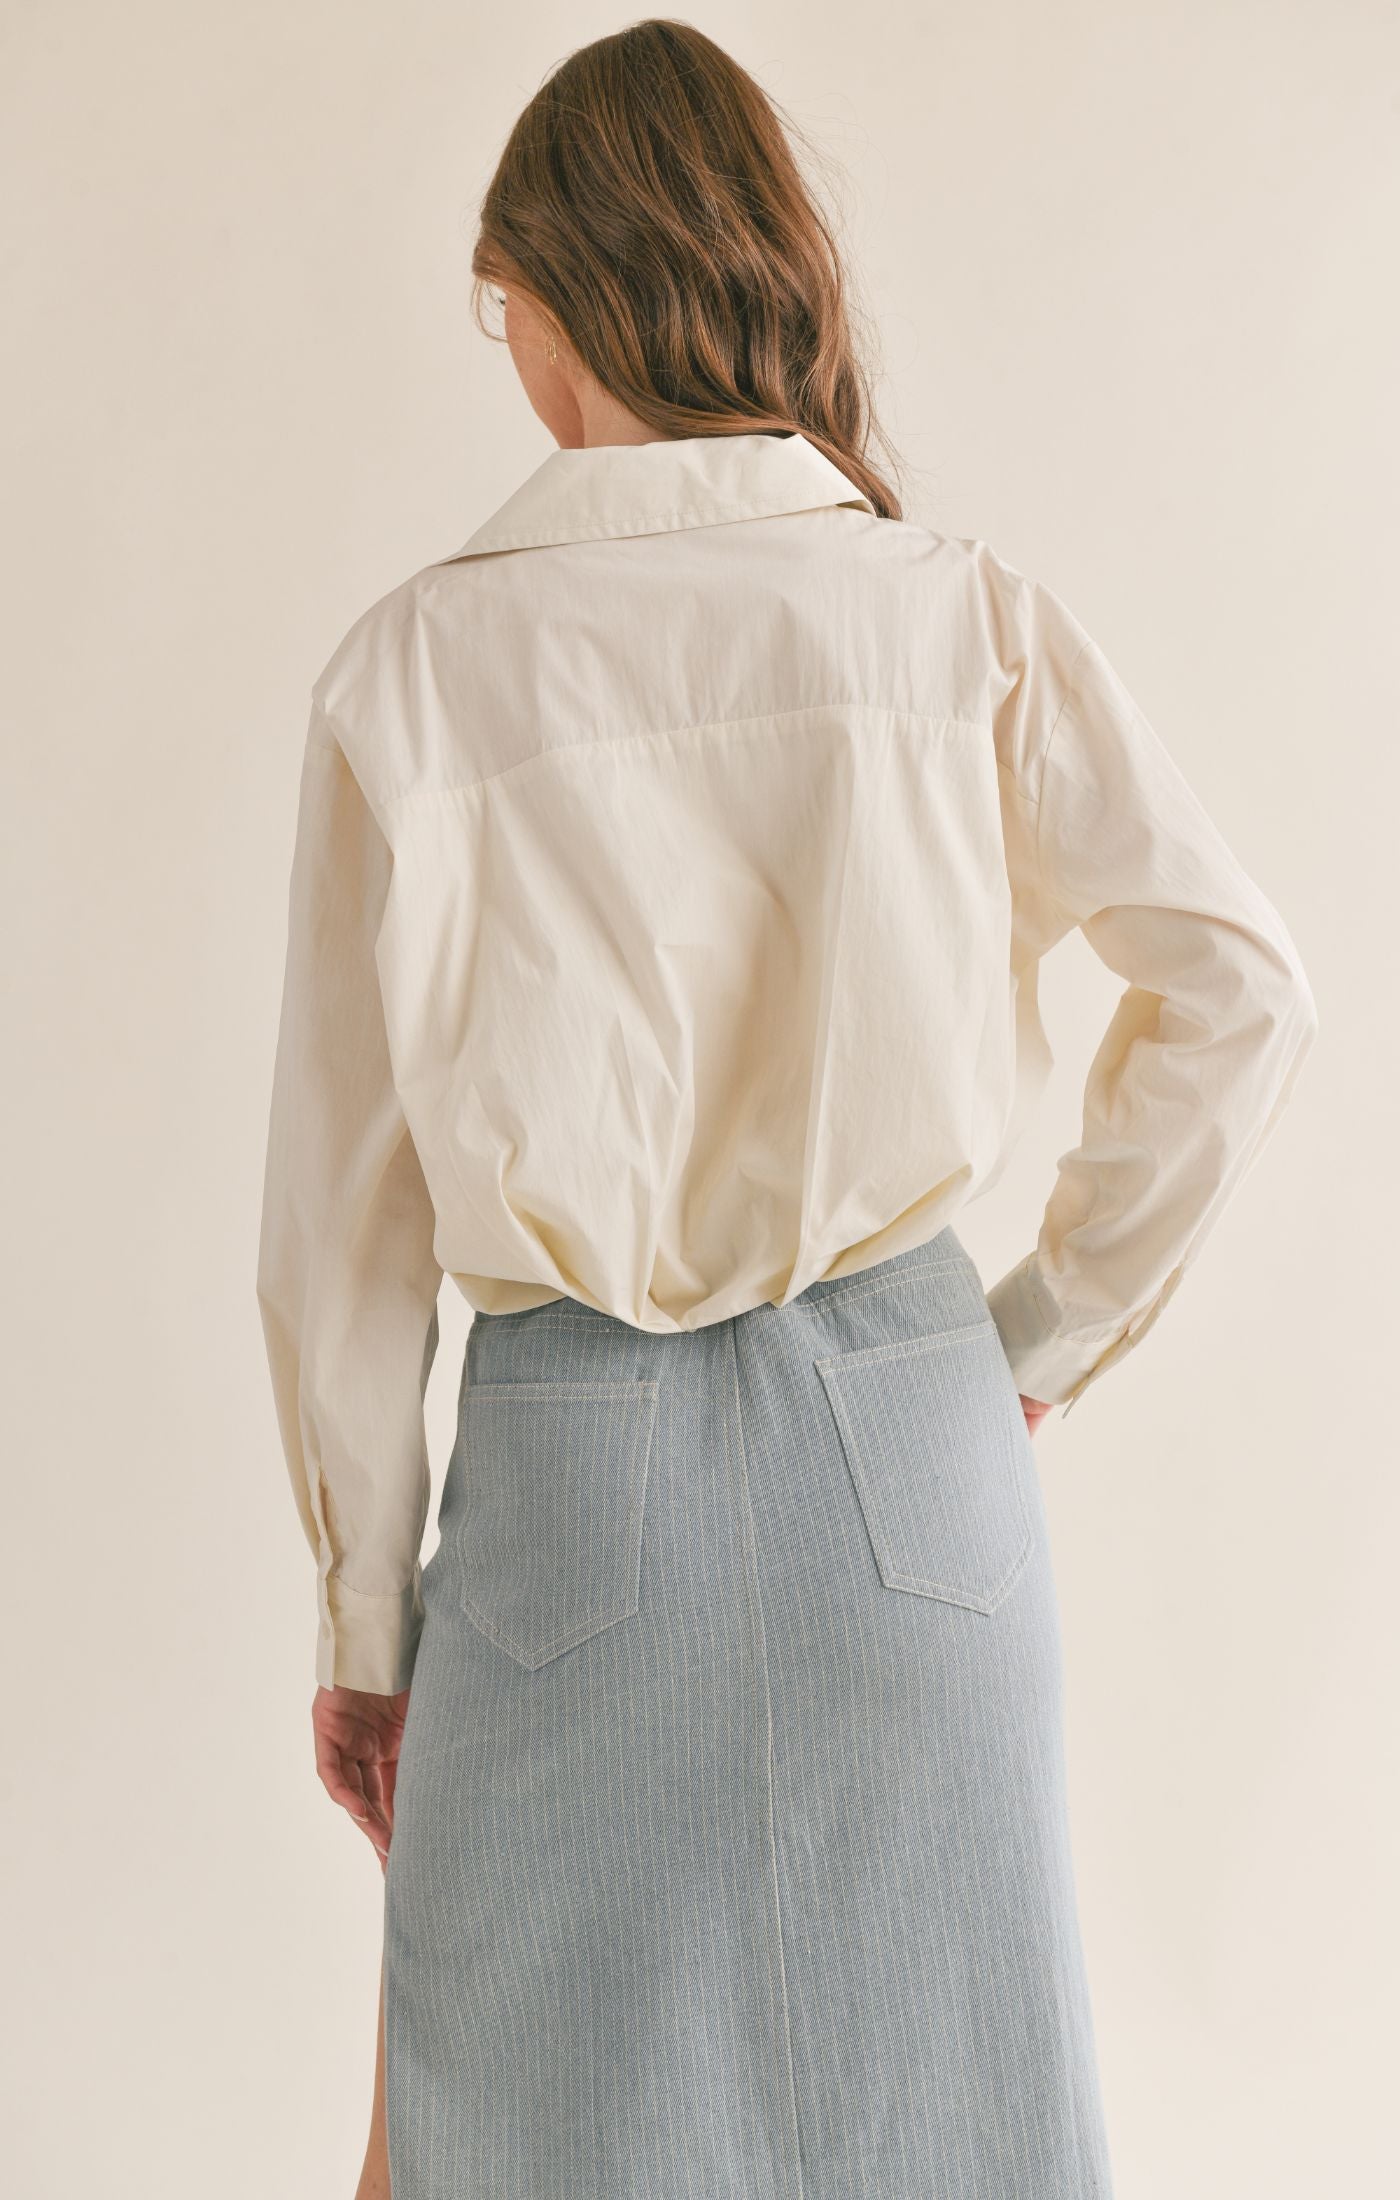 SAGE THE LABEL Love Story Pleated Elastic Waist Top